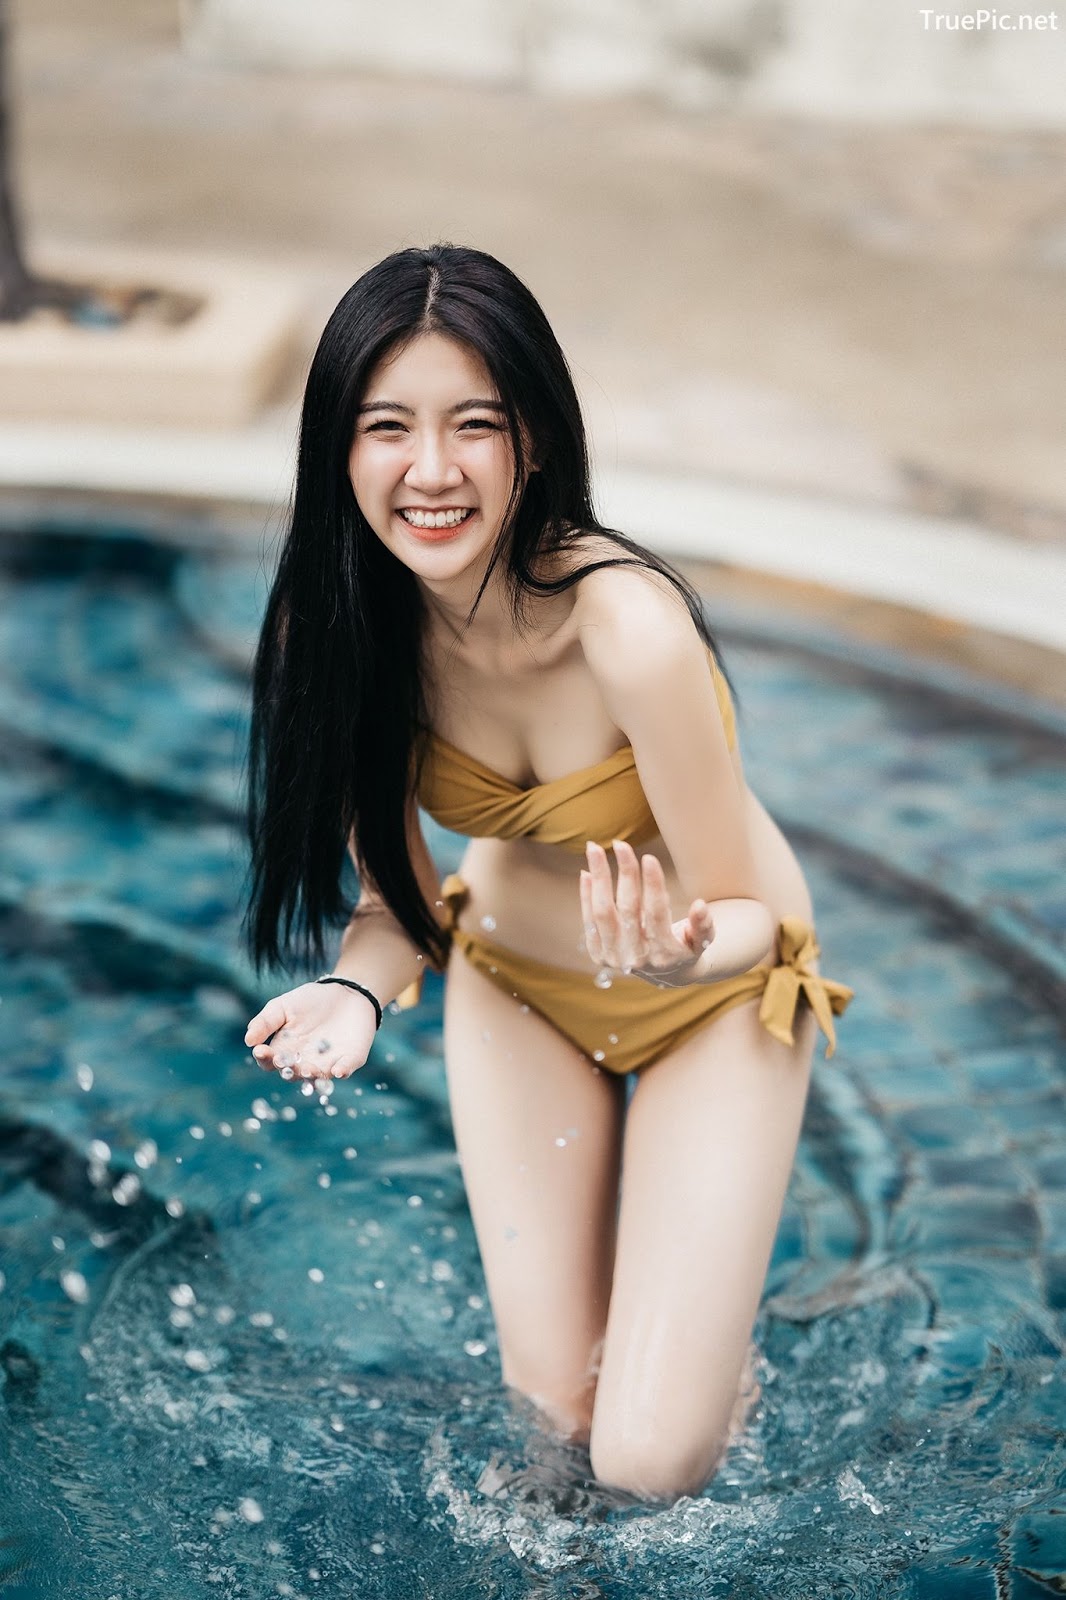 Image Thailand Model - Sasi Ngiunwan - Let’s Summer Chilling - TruePic.net - Picture-16